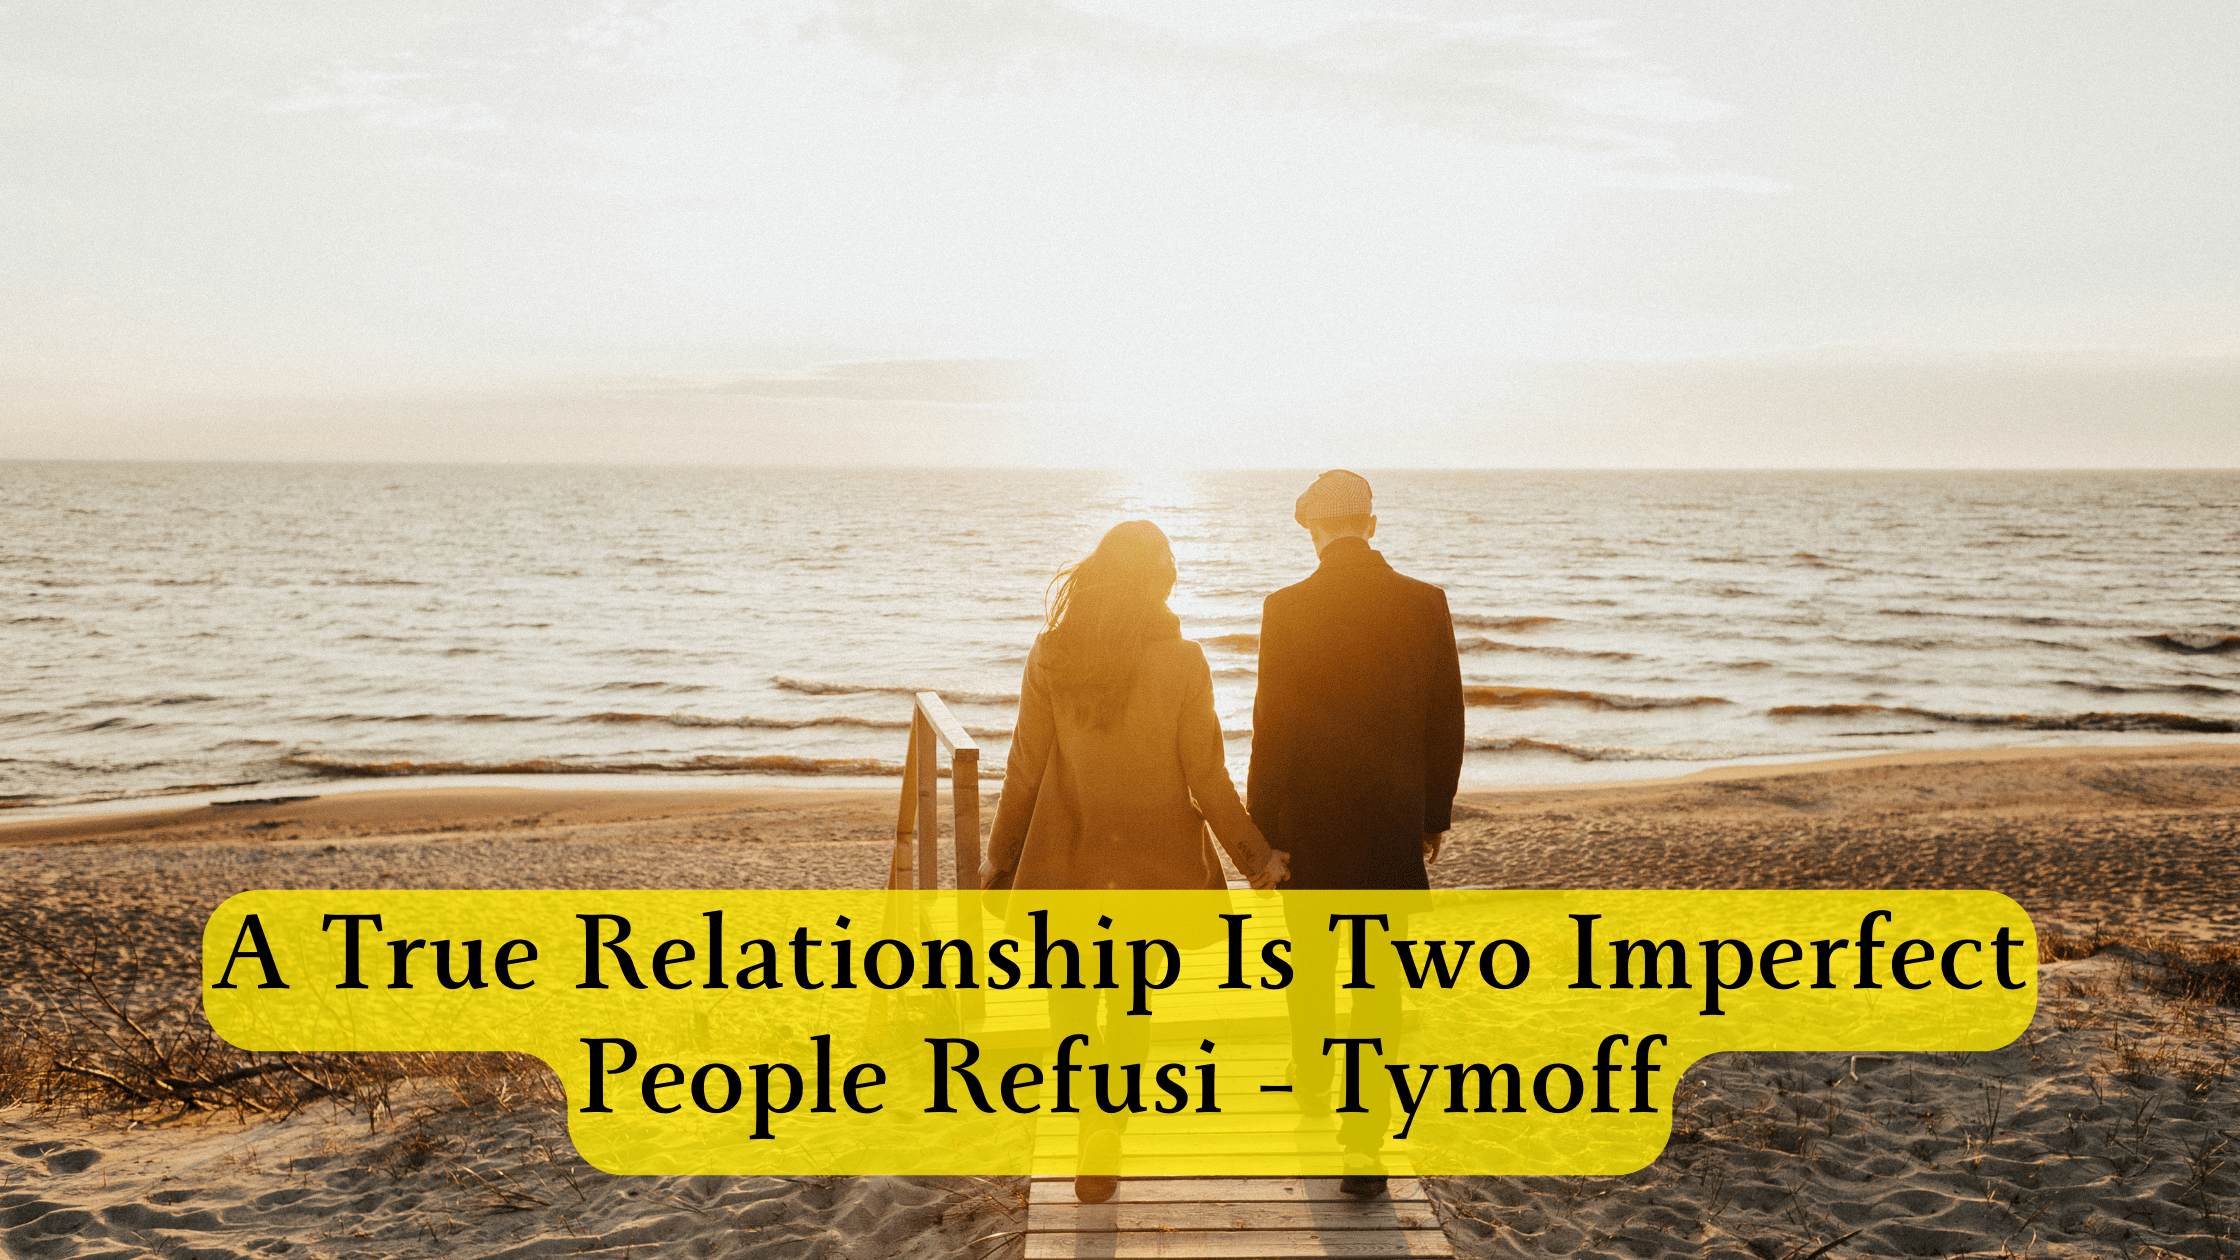 a true relationship is two imperfect people refusi – tymoff